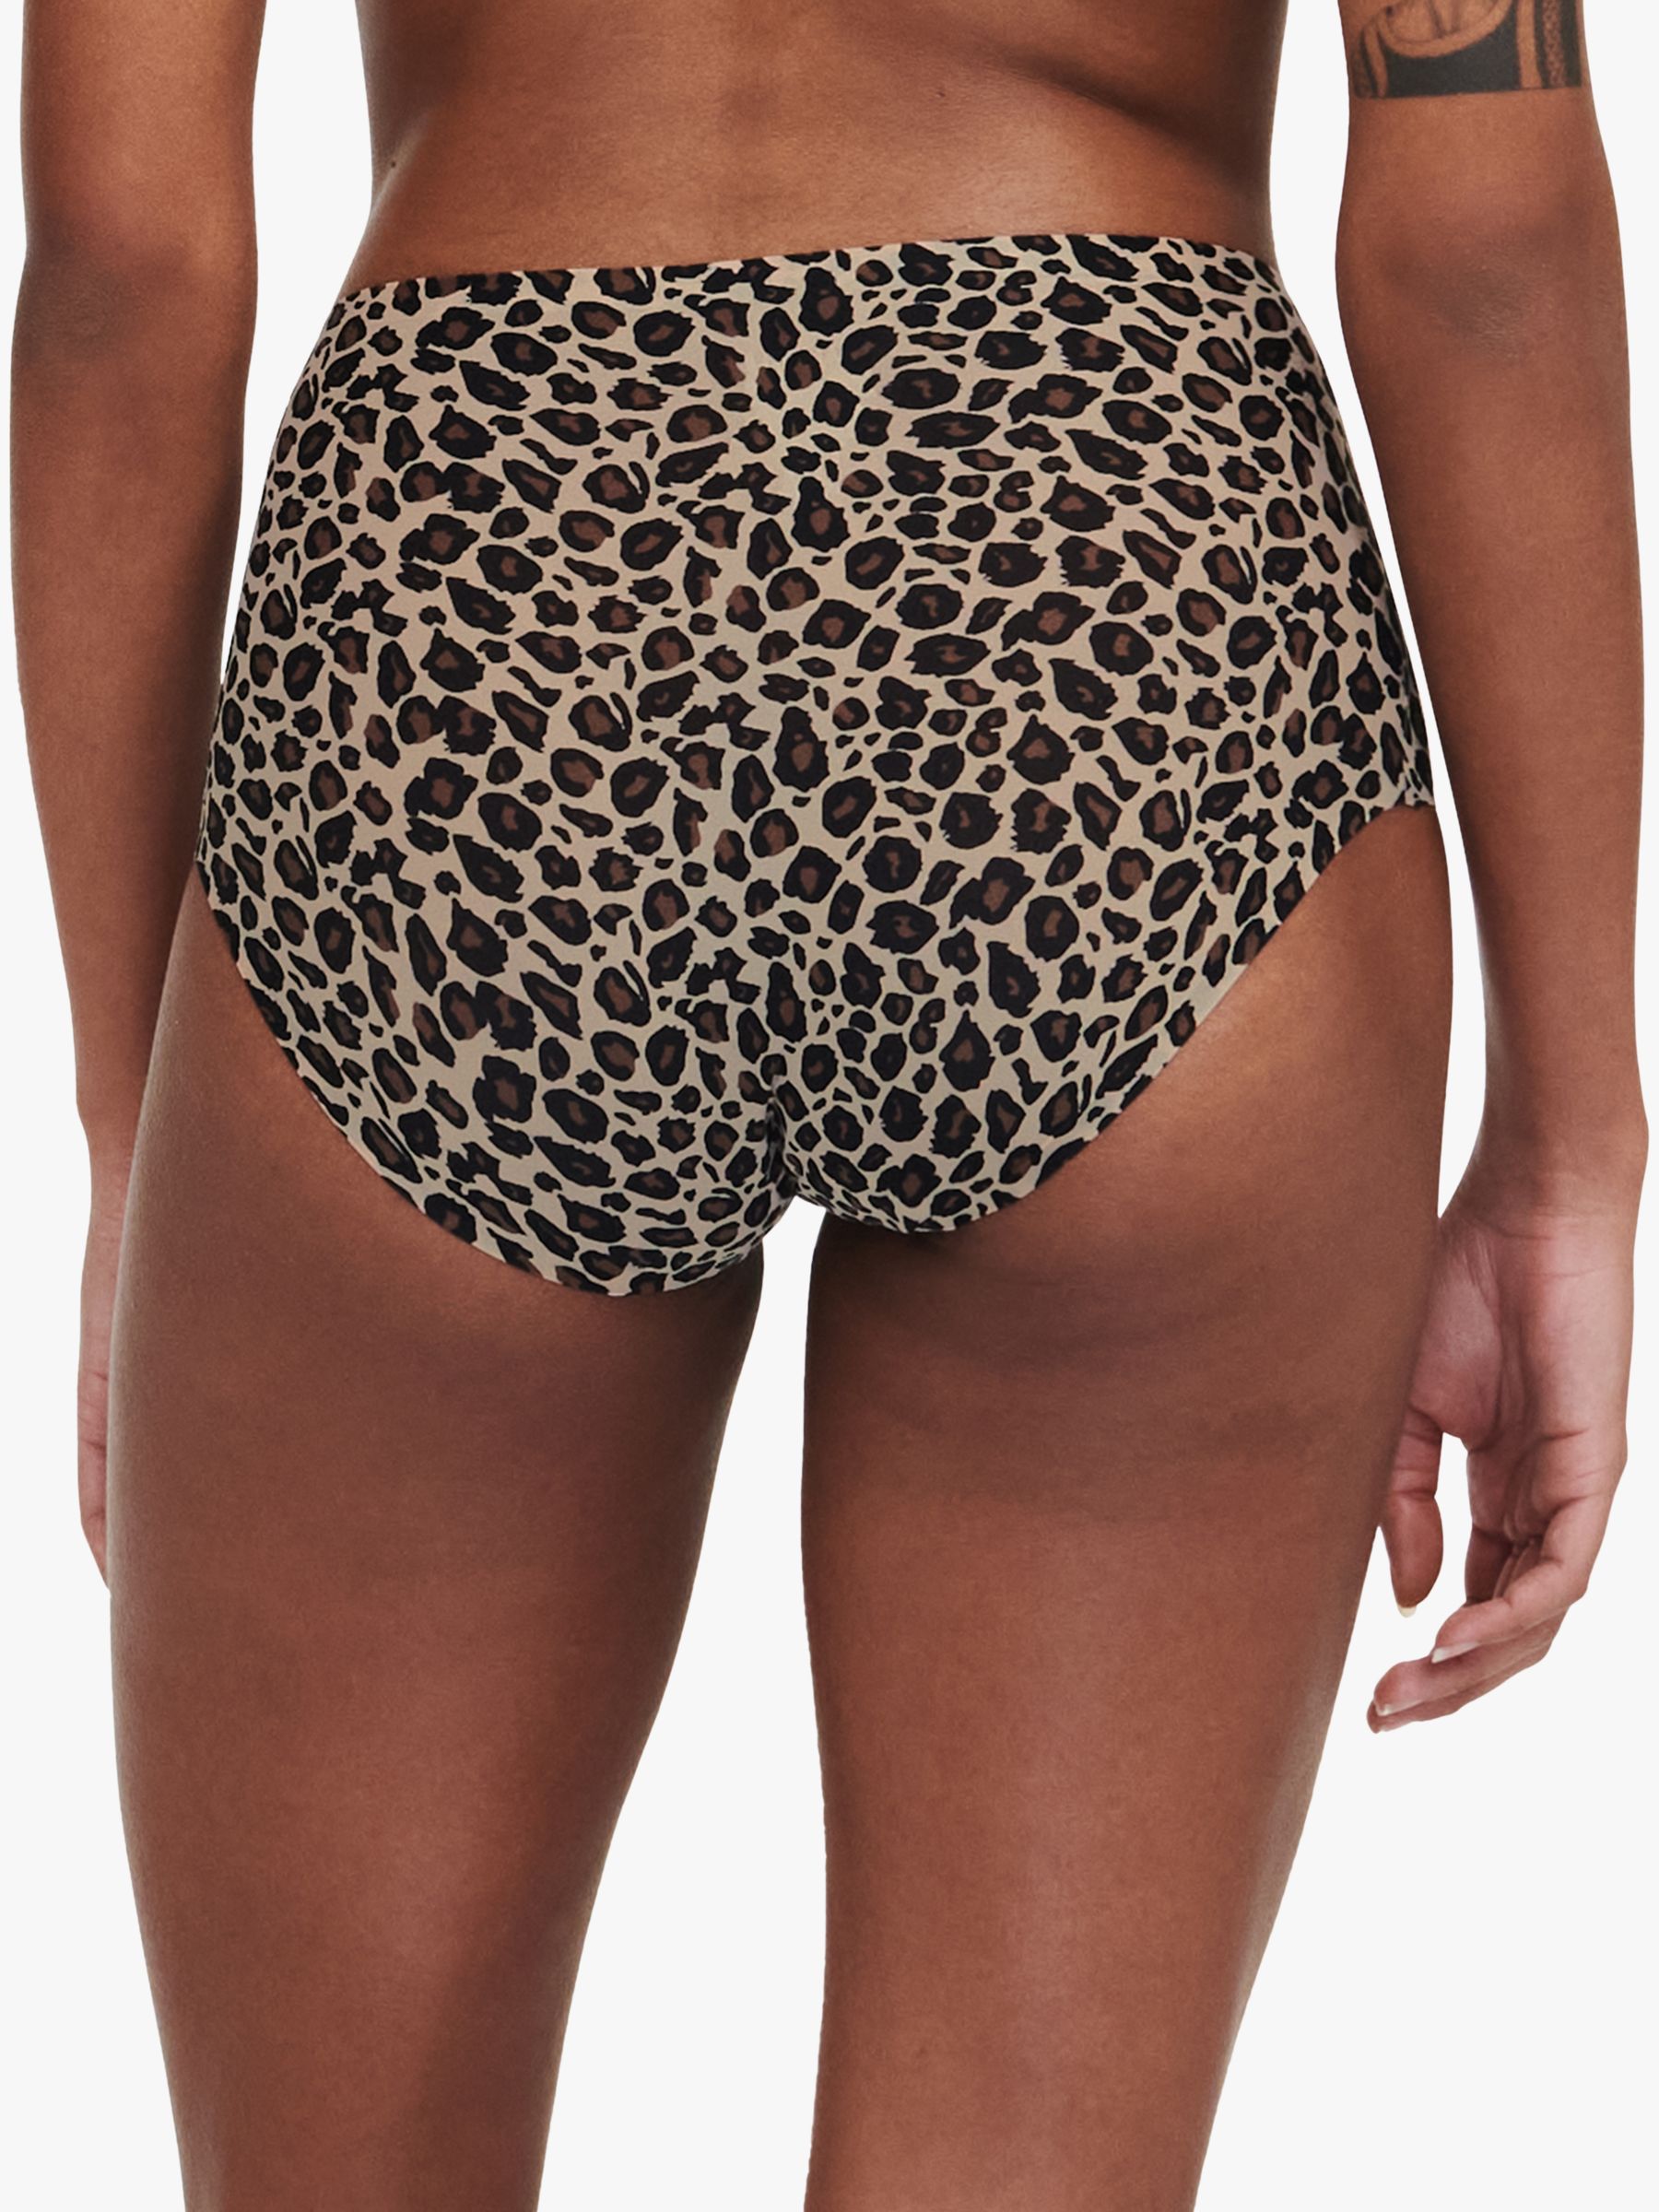 Chantelle Soft Stretch High Waisted Knickers, Leopard Print, One Size